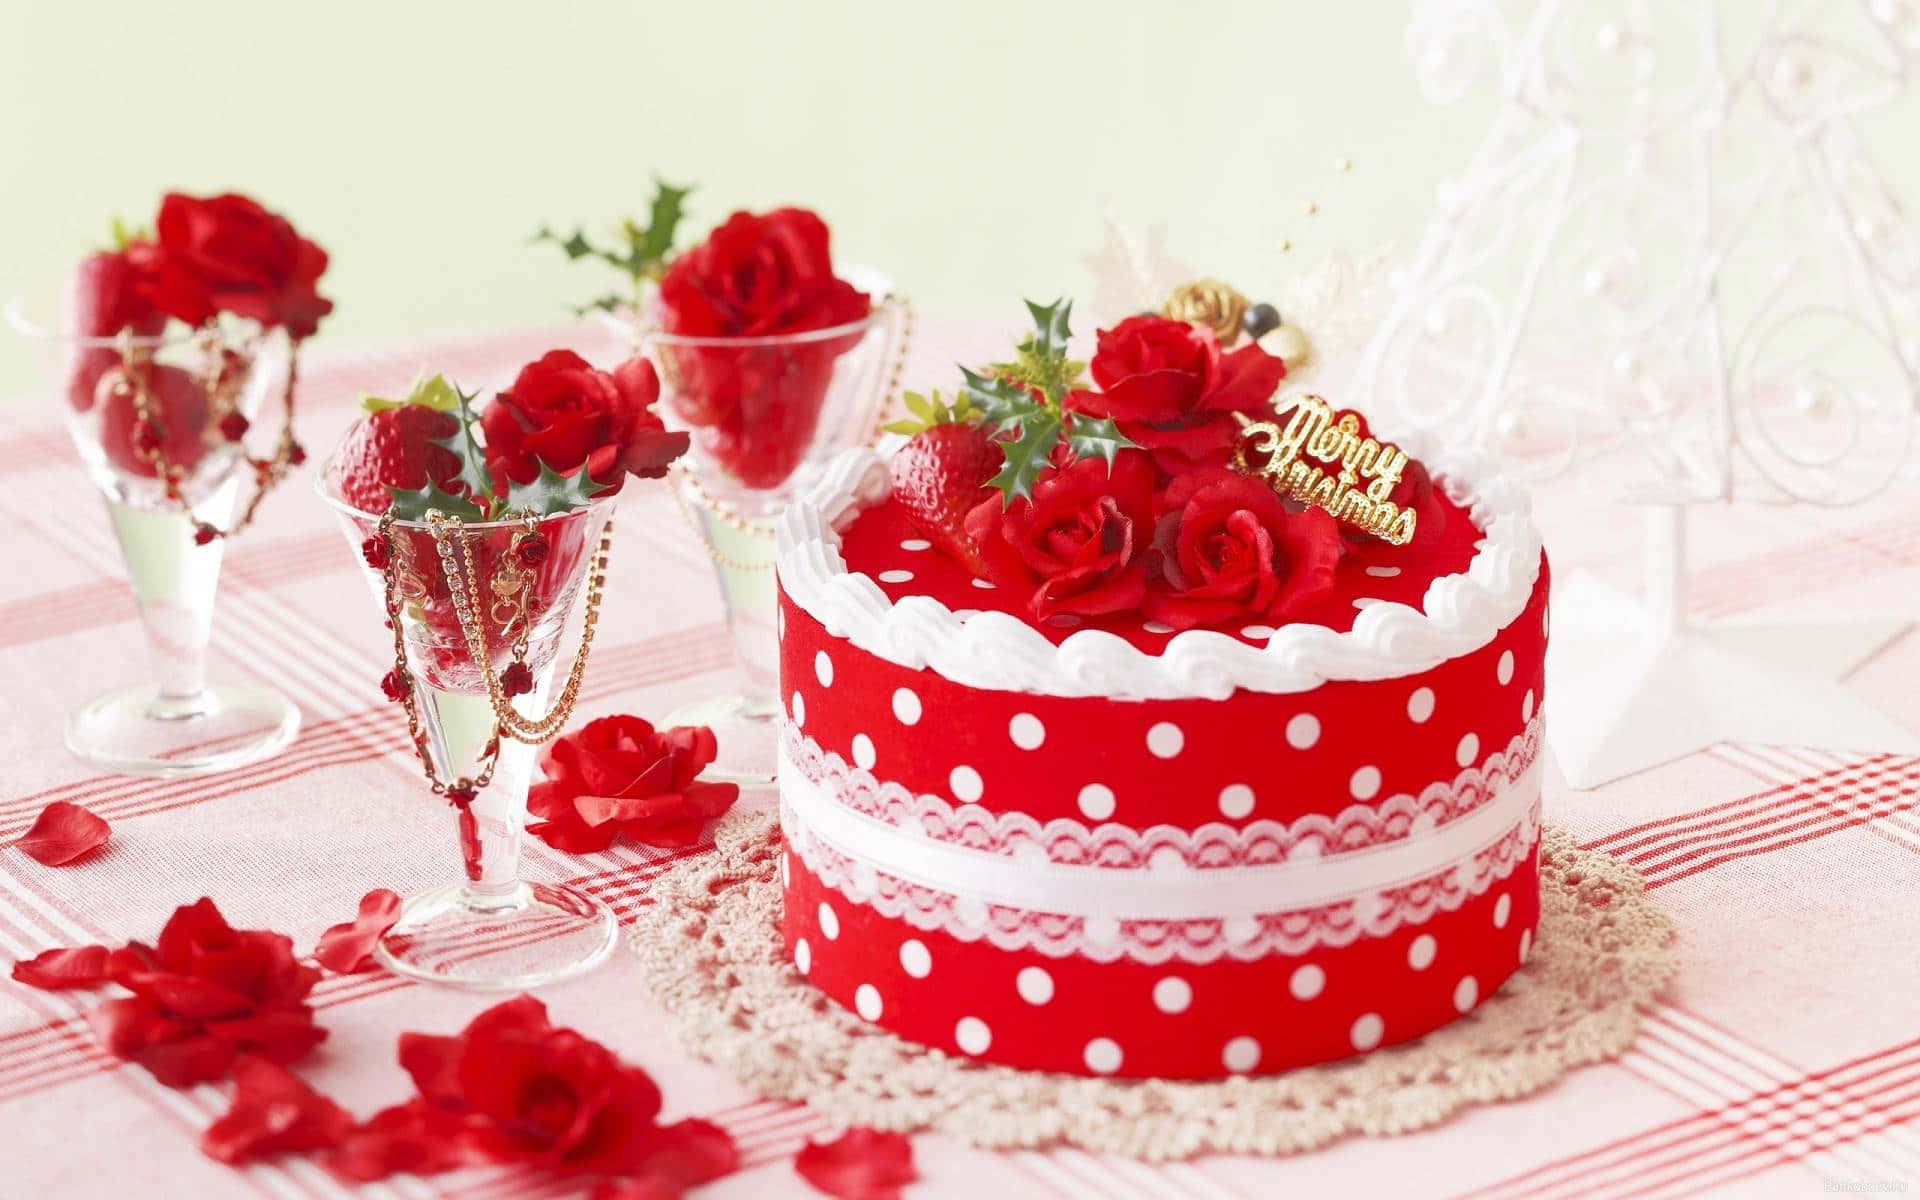 A Red Cake With Red Roses On Top